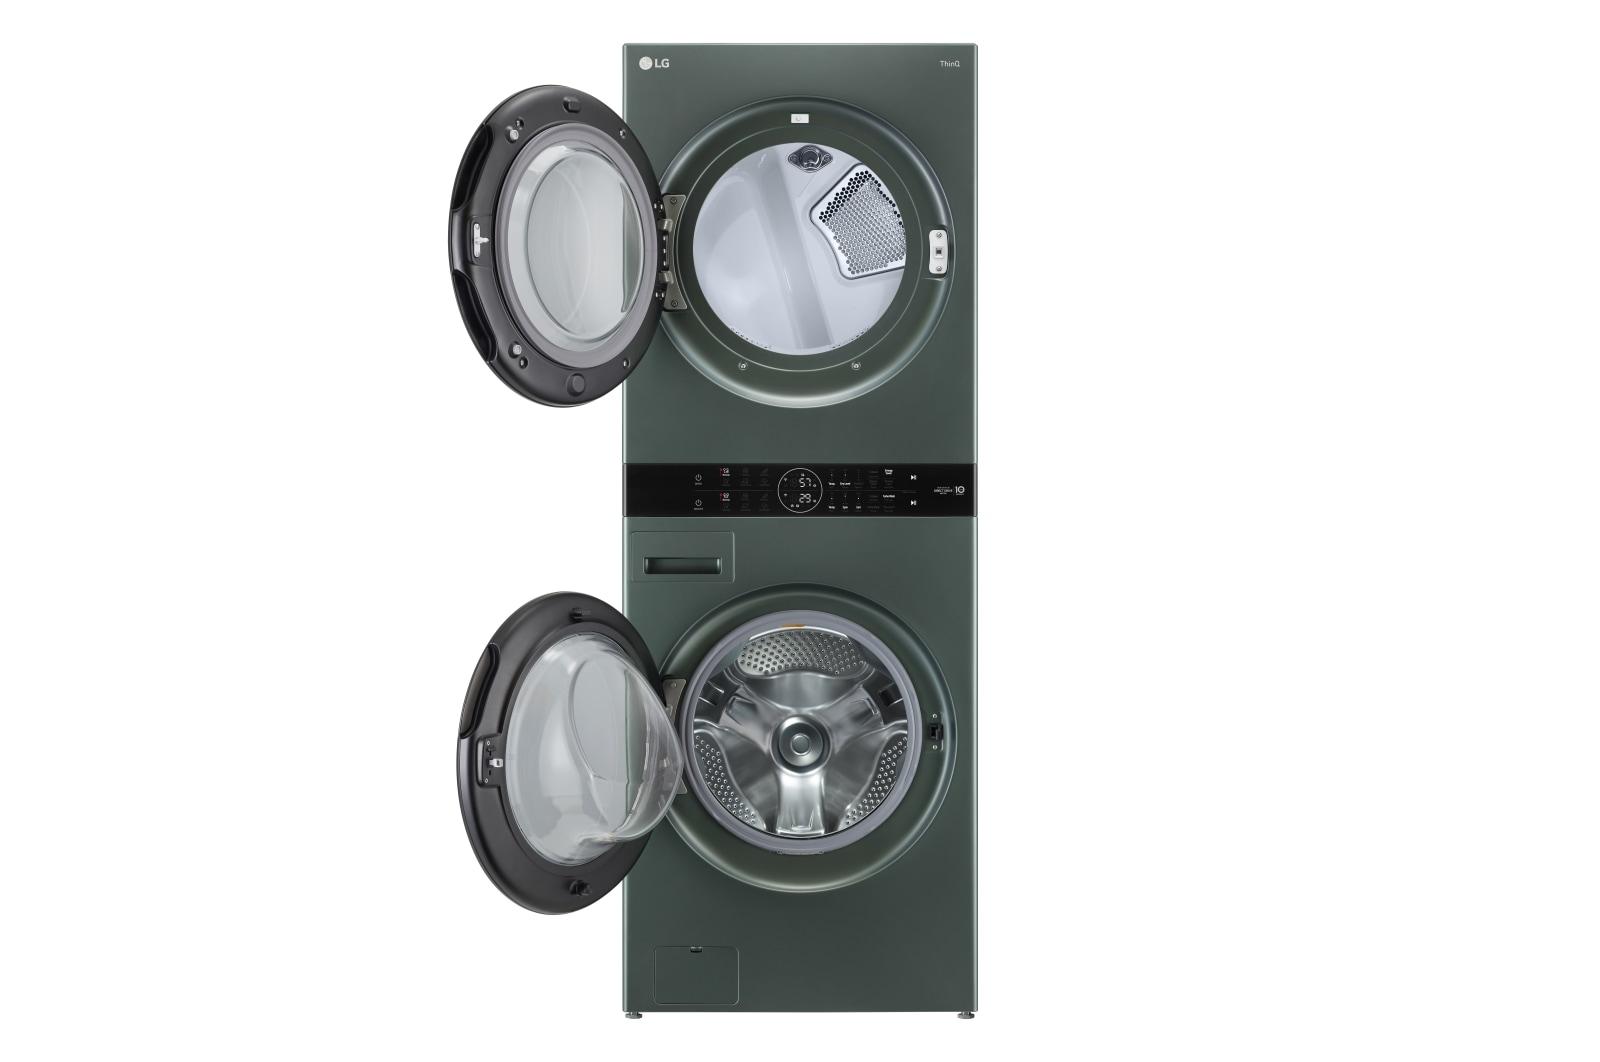 Lg WKEX200HGA Single Unit Front Load Lg Washtower™ With Center Control™ 4.5 Cu. Ft. Washer And 7.4 Cu. Ft. Electric Dryer